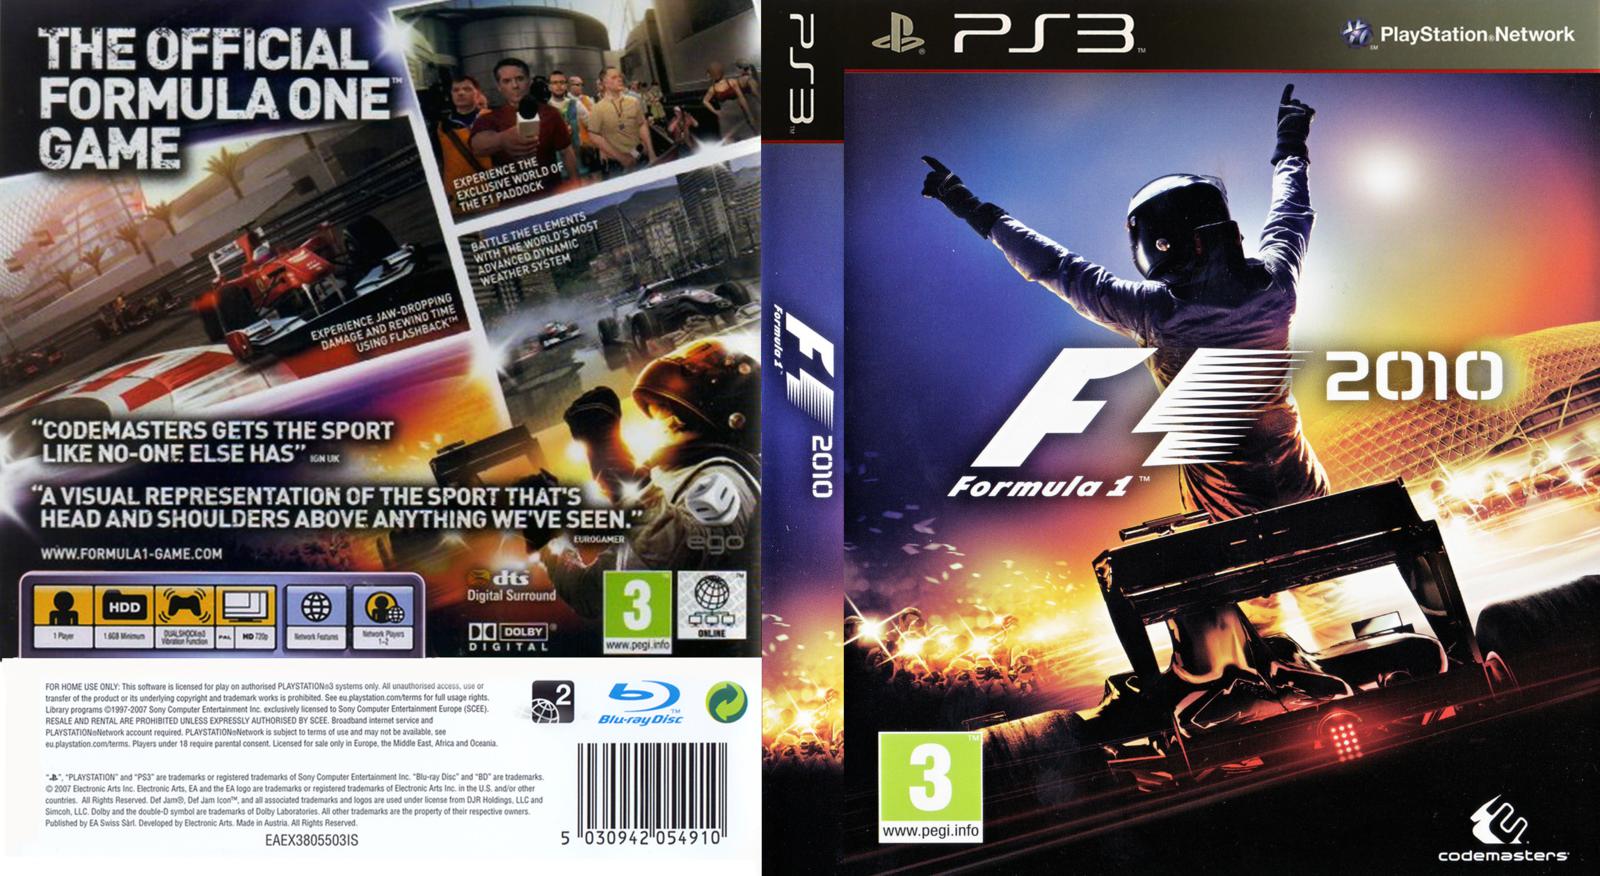 Ps3 игры форум. F1 2010 ps3. Formula one 2010 ps3. Formula 1 ps3 диски. F1 2012 ps3 диск.